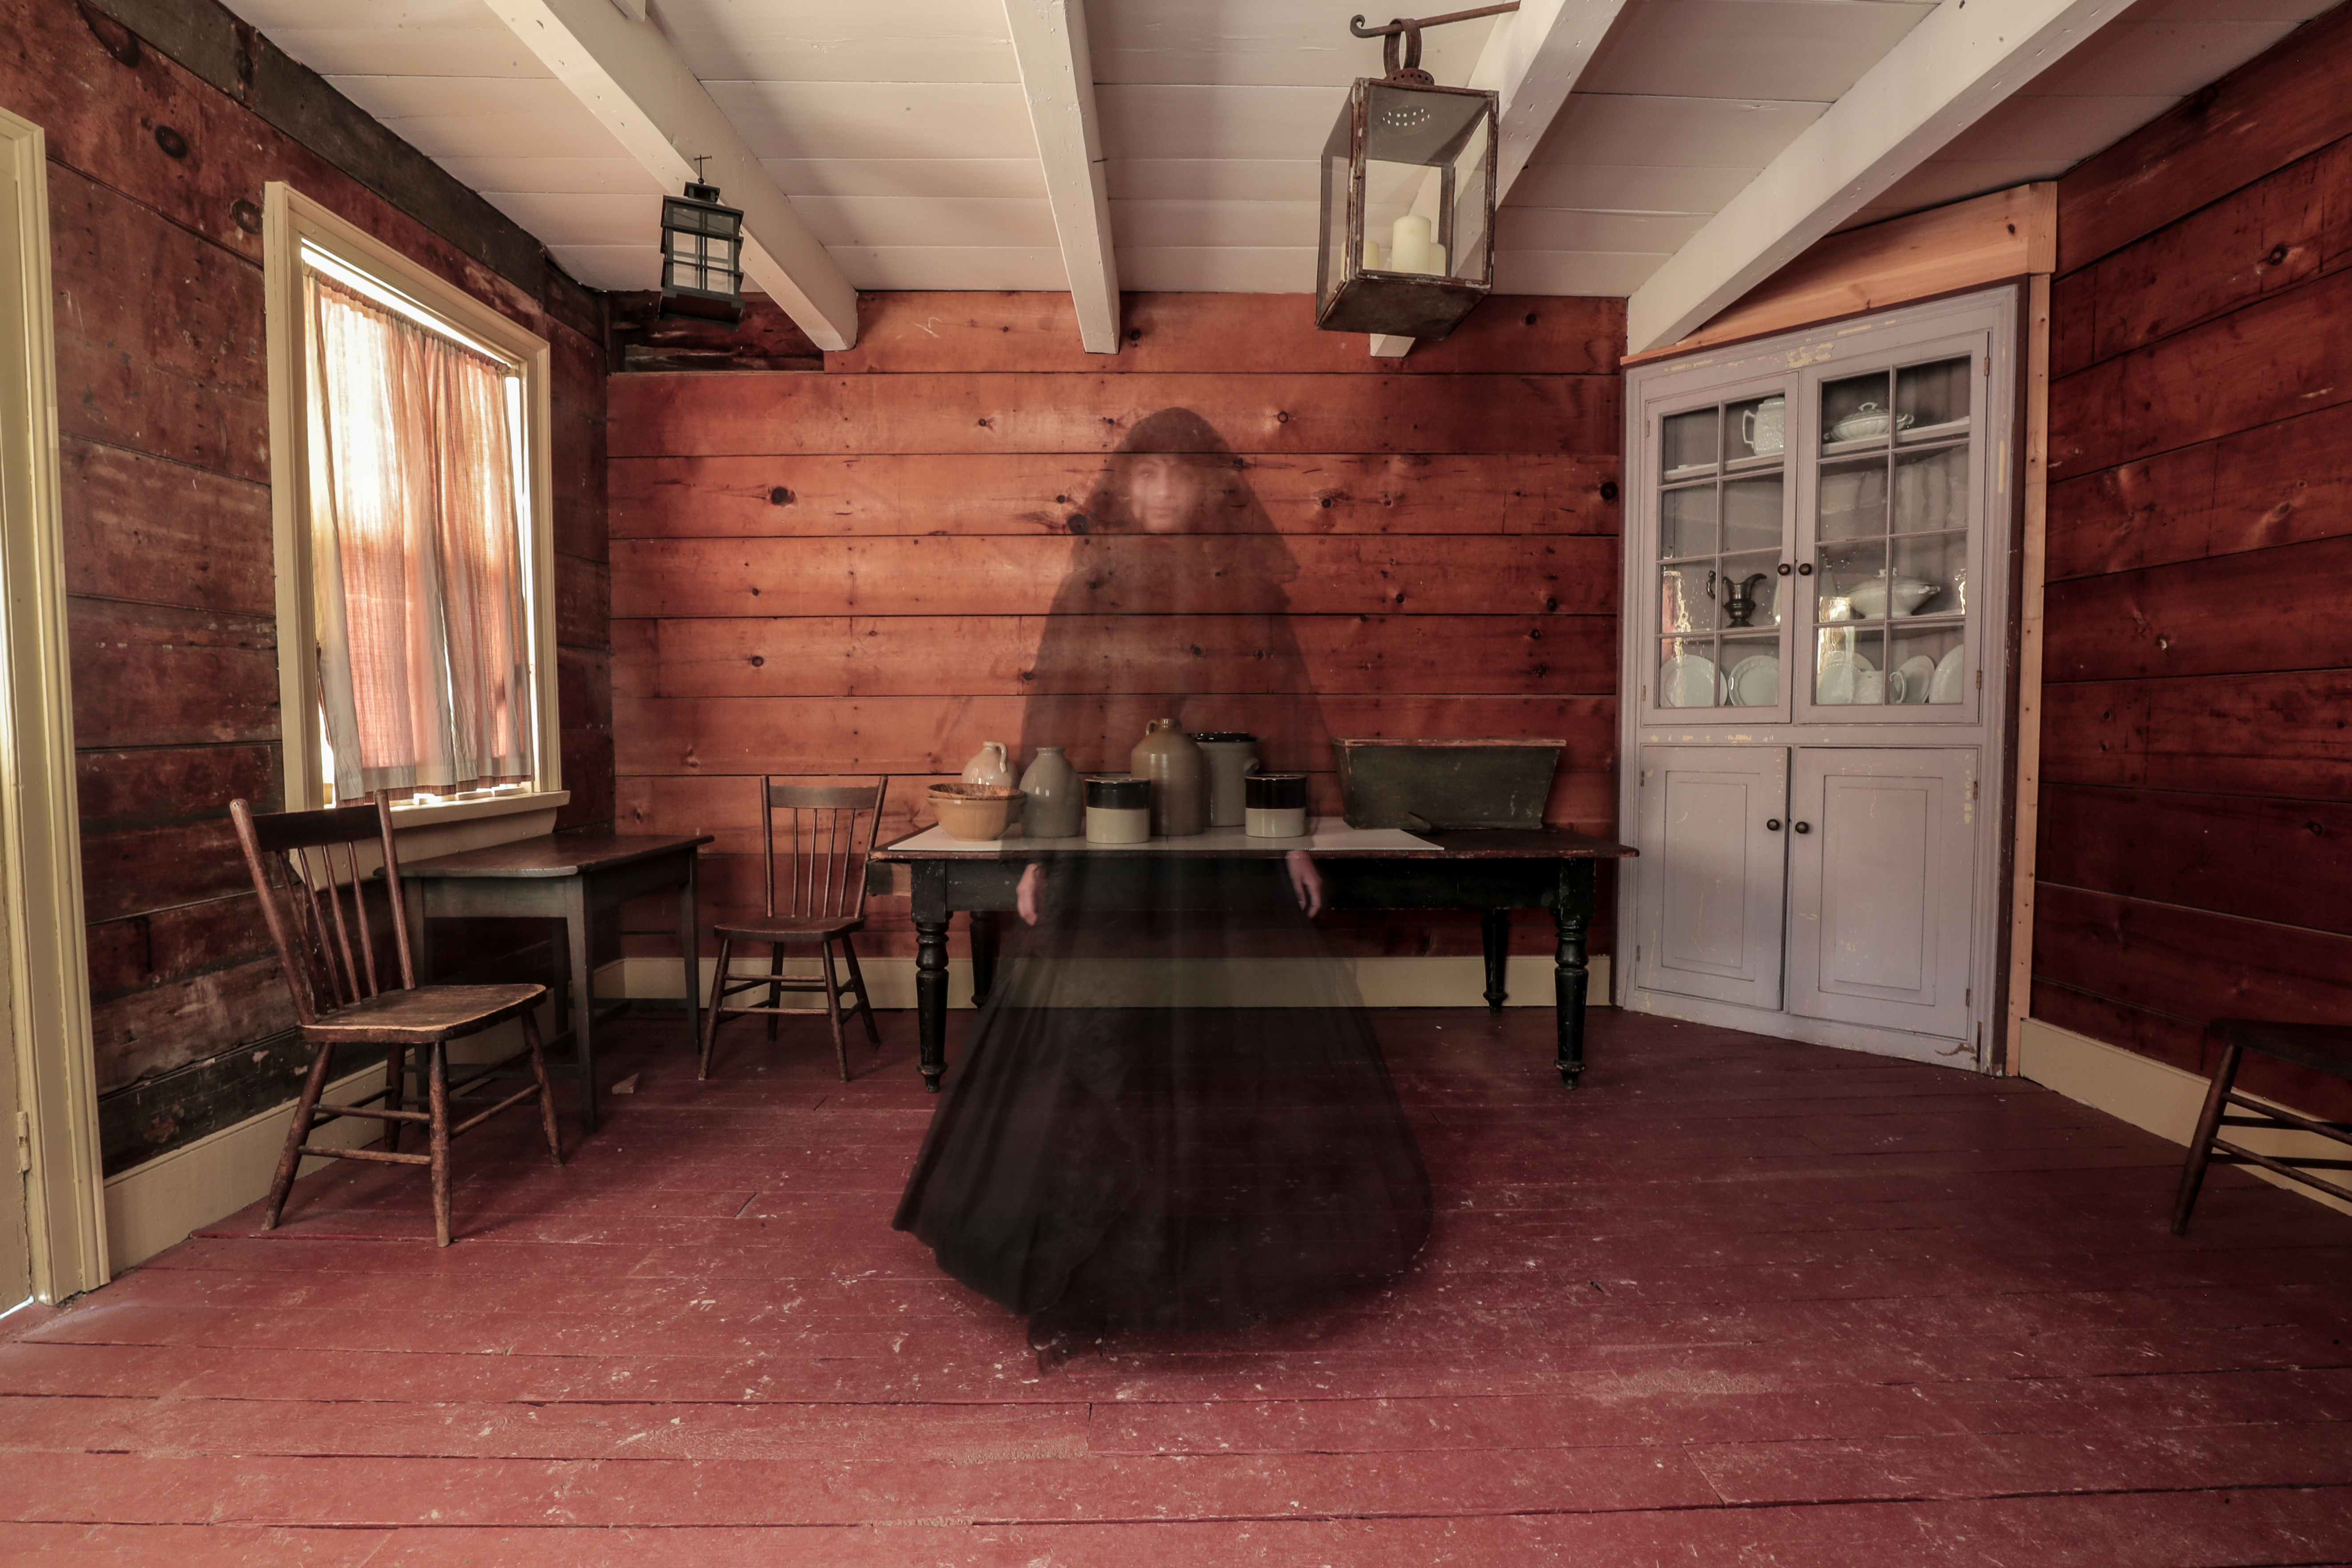 Image of a shadowy figure in a black dress standing inside an old log cabin.